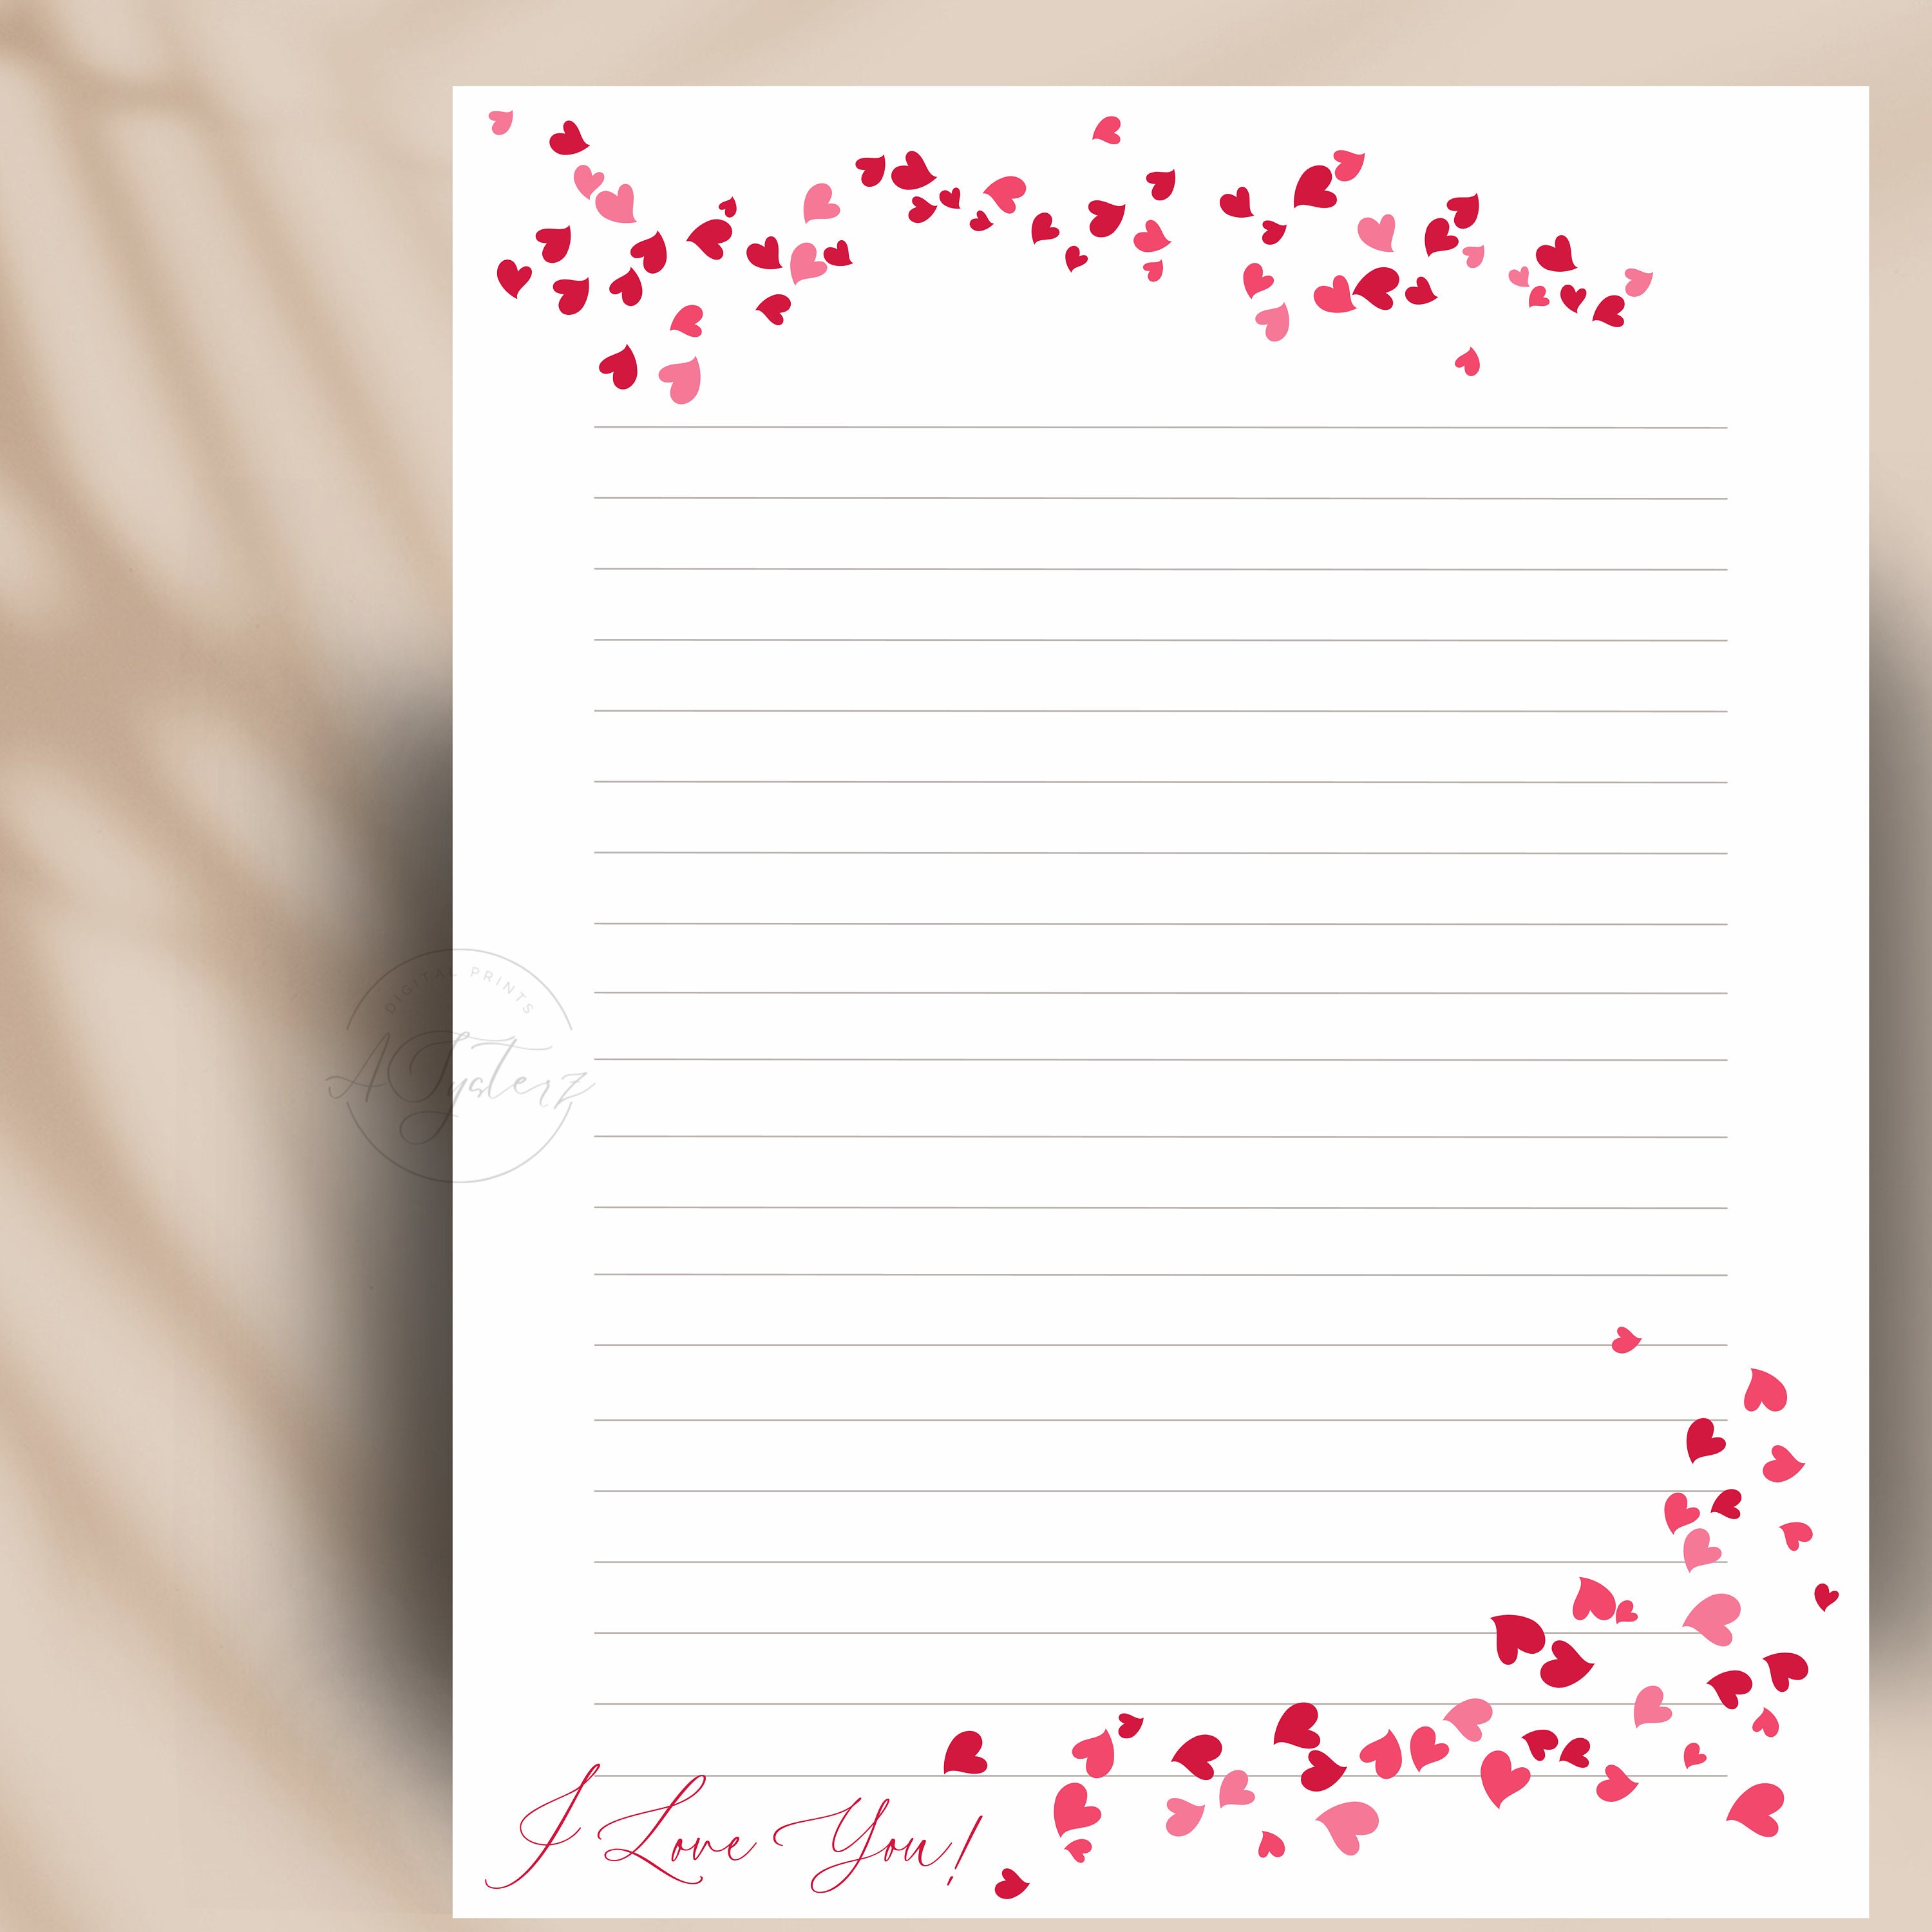 Digital Note Paper Letter Writing Template Downloadable Stationery  Stationary Love Hearts Lecture Notes Notetaking 